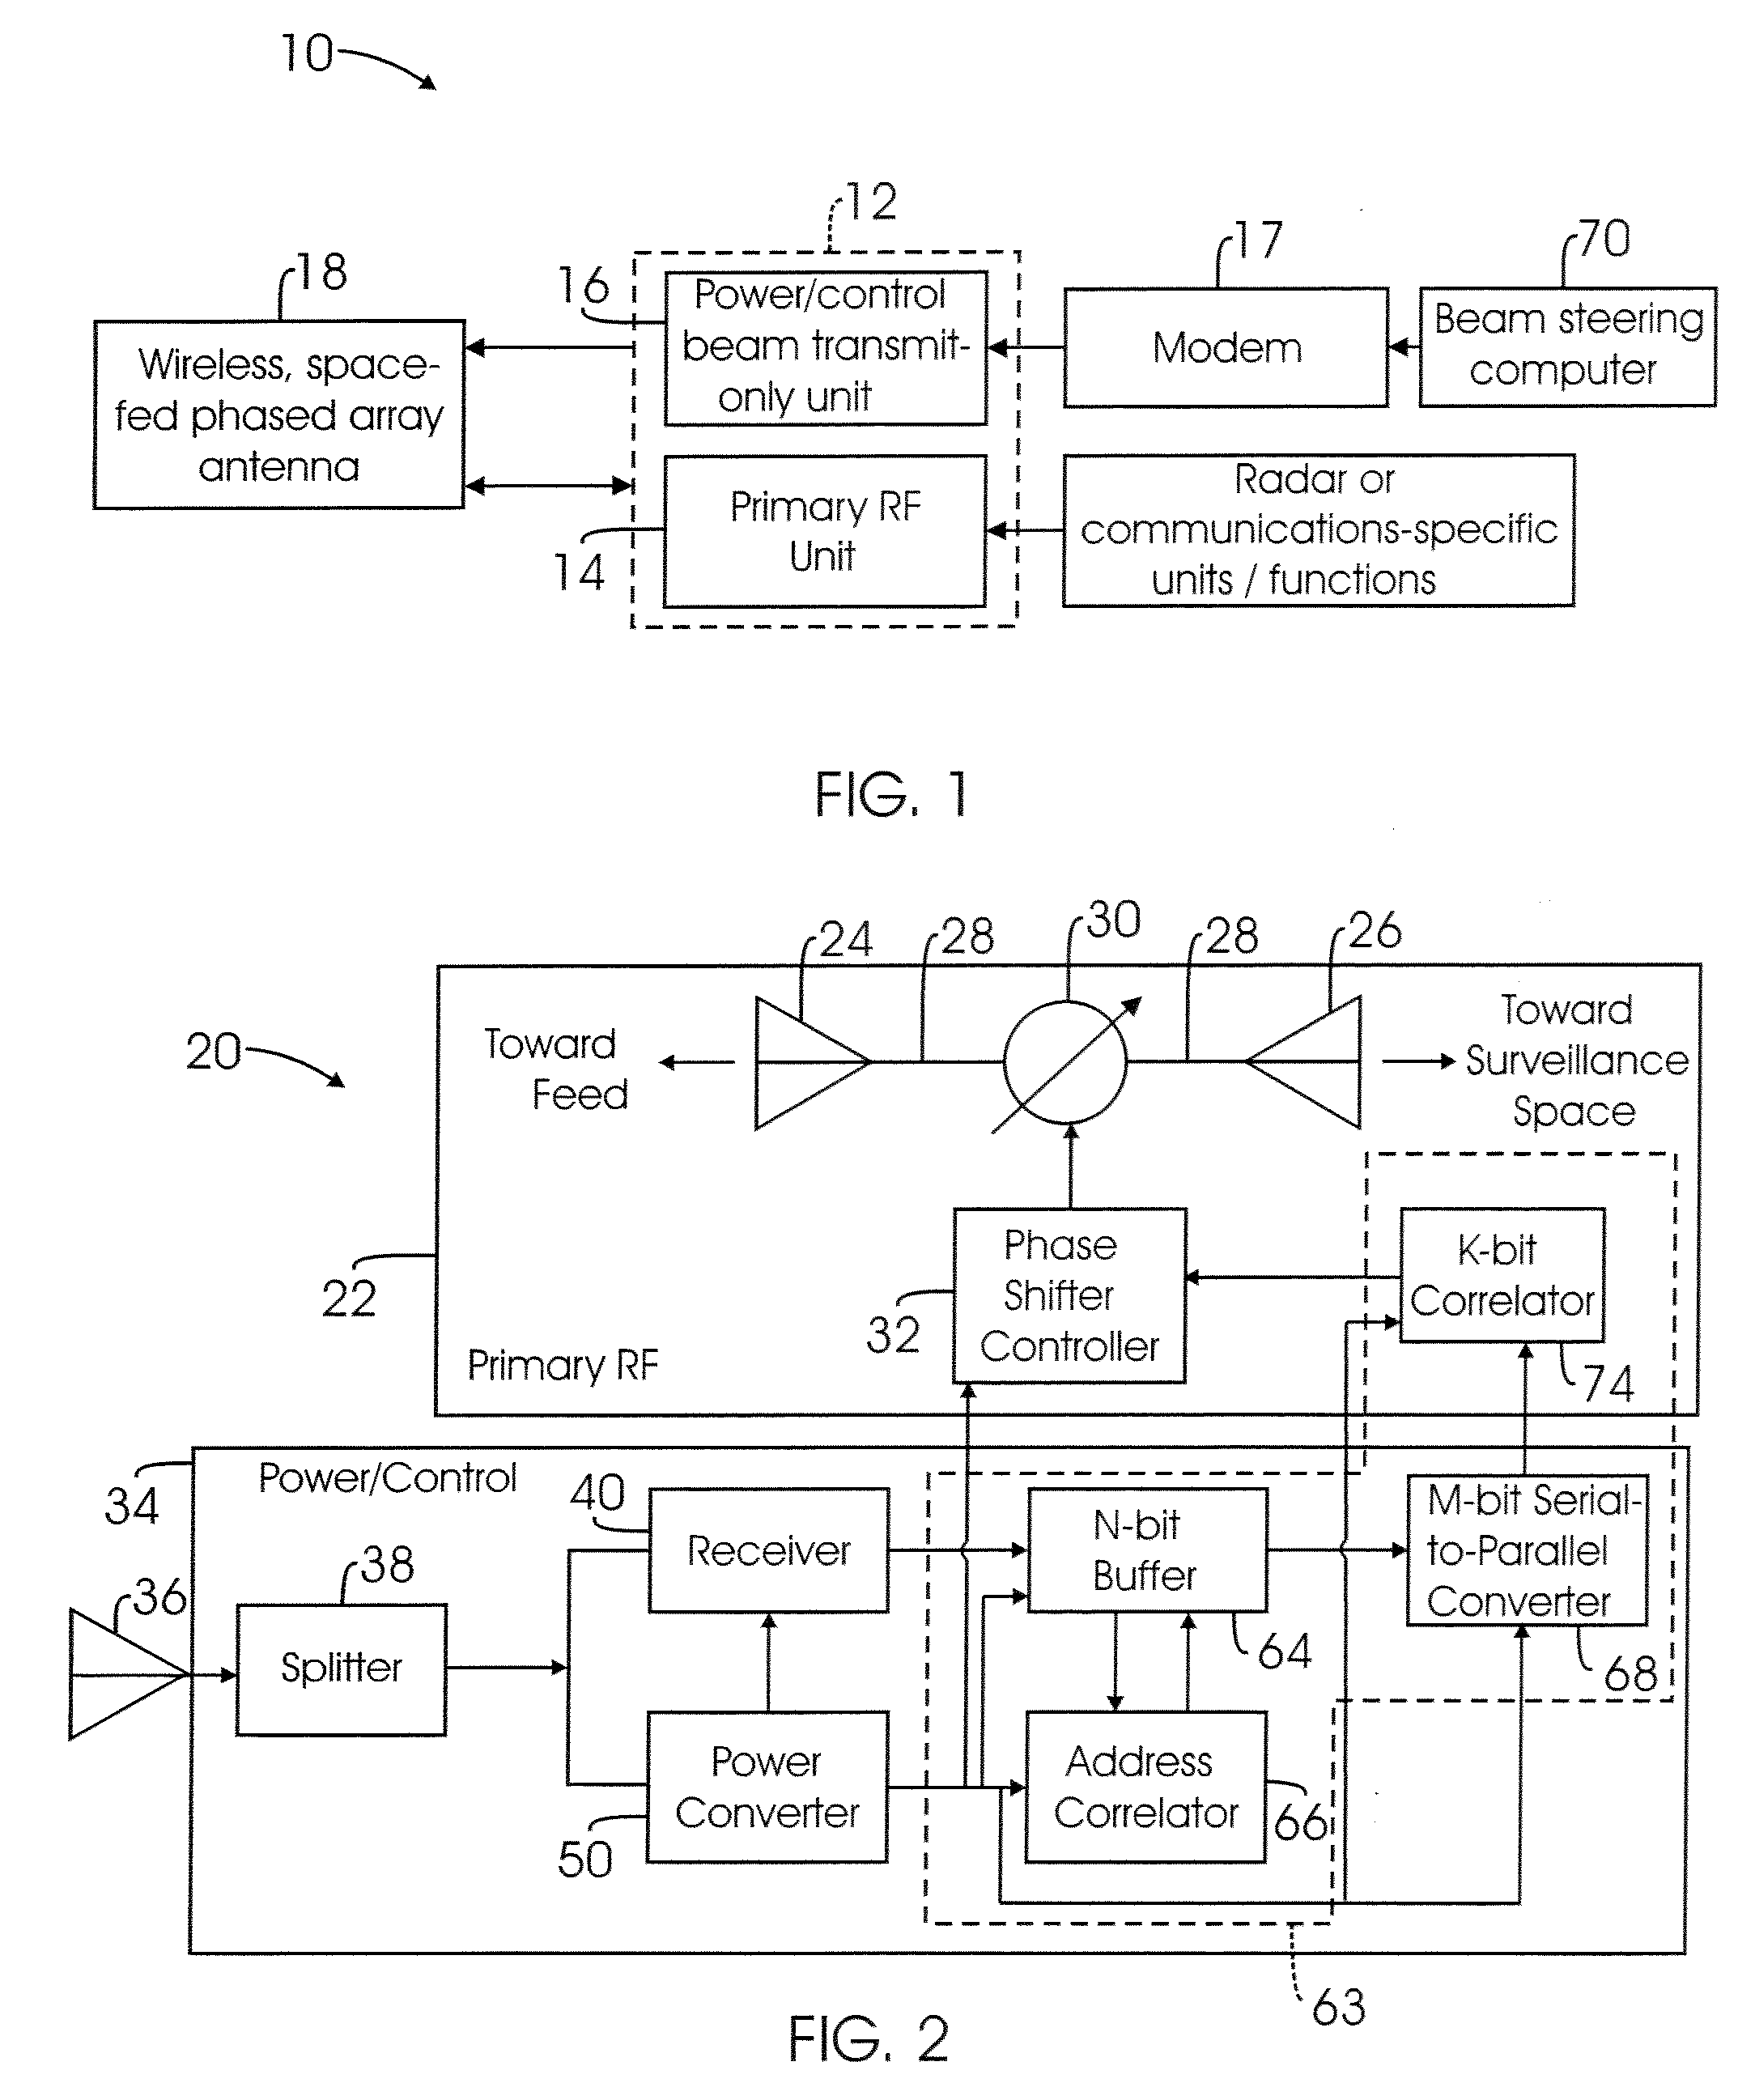 System and methods for radar and communications applications